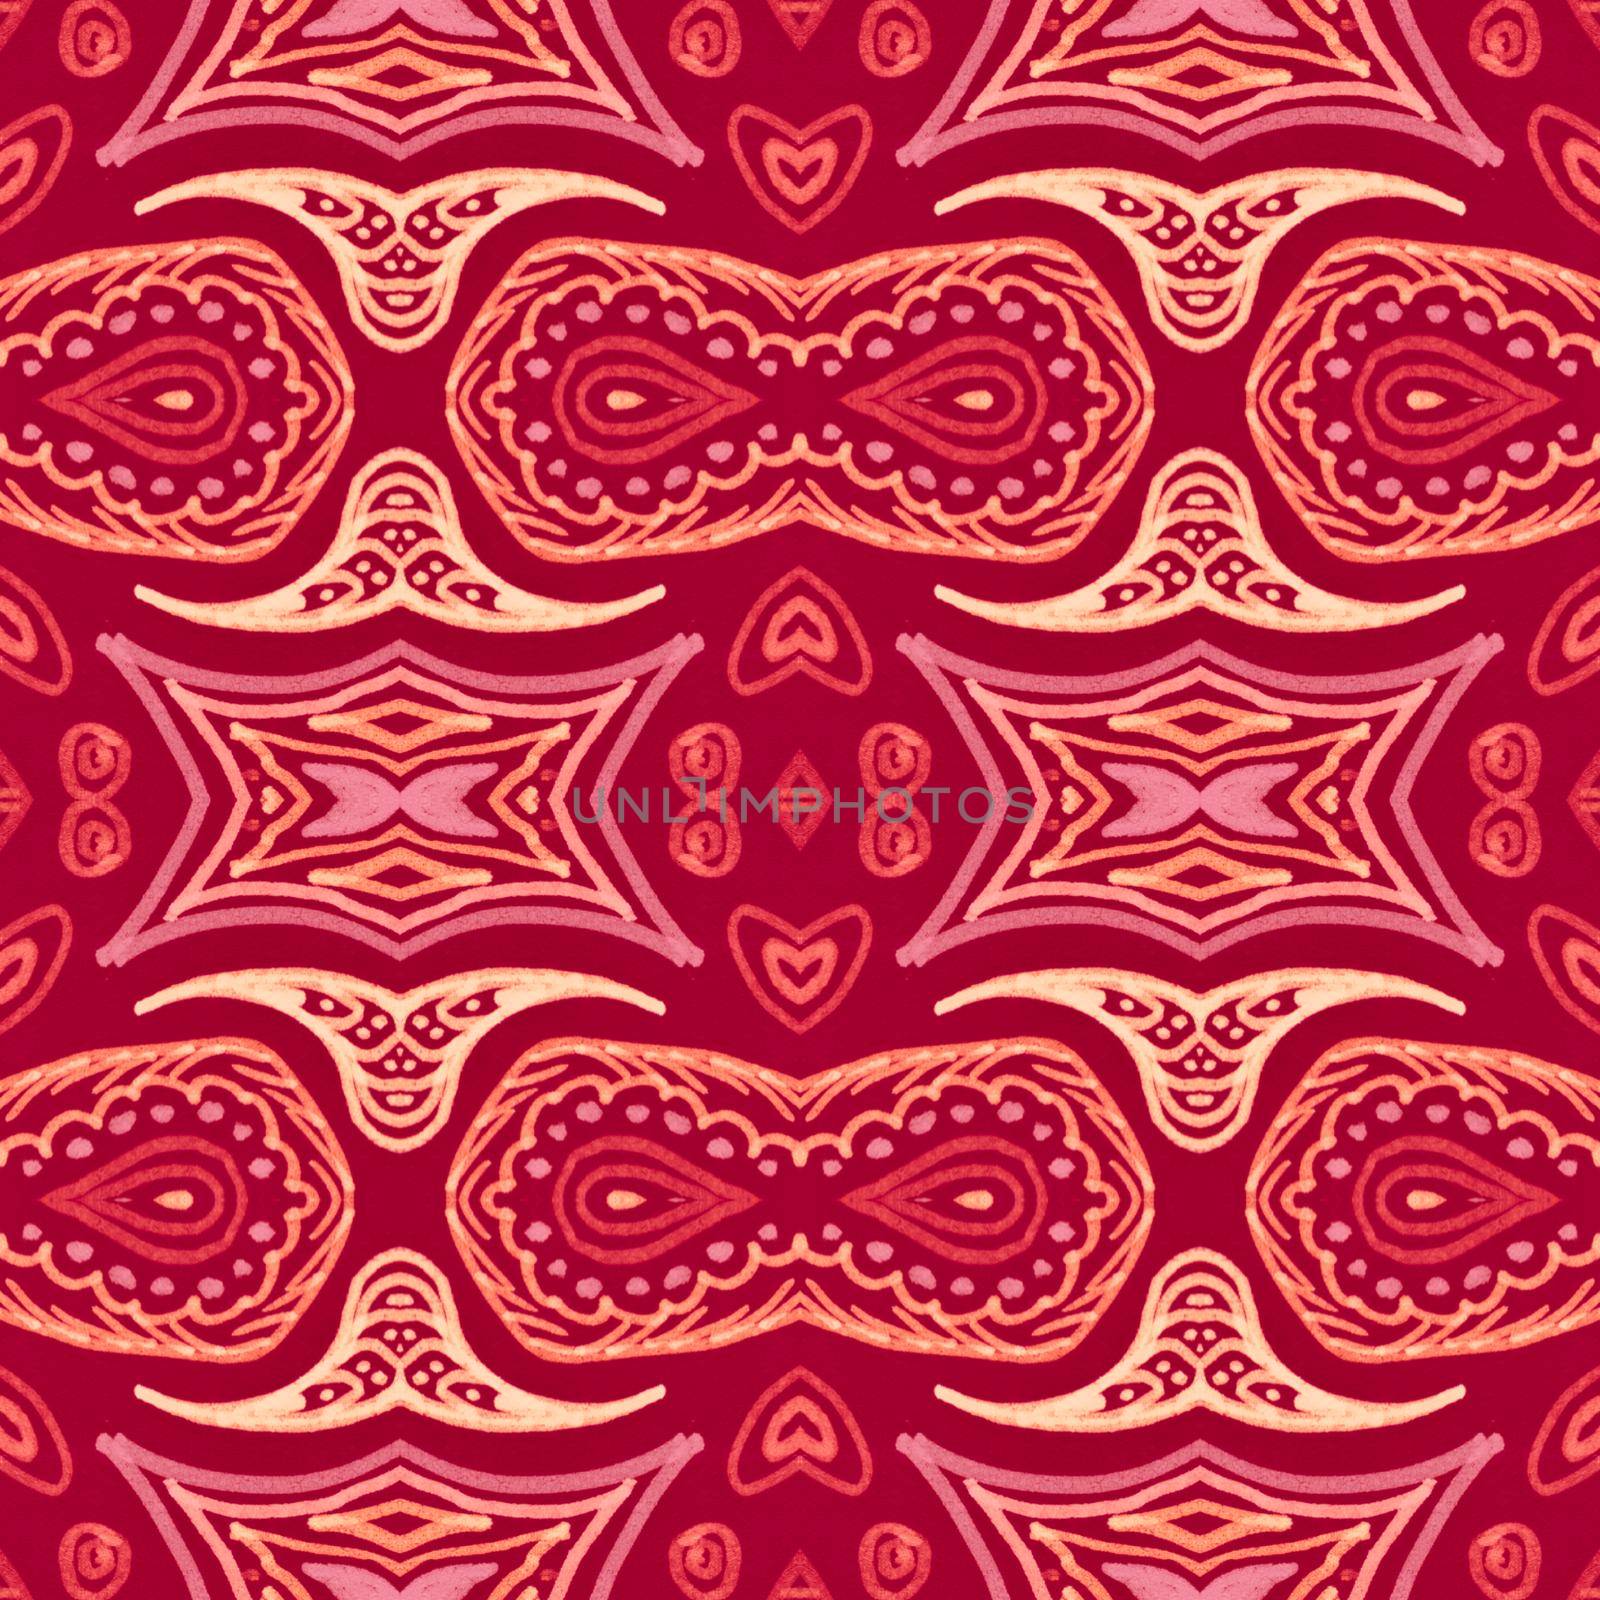 Red texture chinese. New year japanese background. Art asian style. Seamless chinese pattern. Vintage hand drawn geometric ornament. Abstract floral ethnic wallpaper. Oriental chinese pattern.